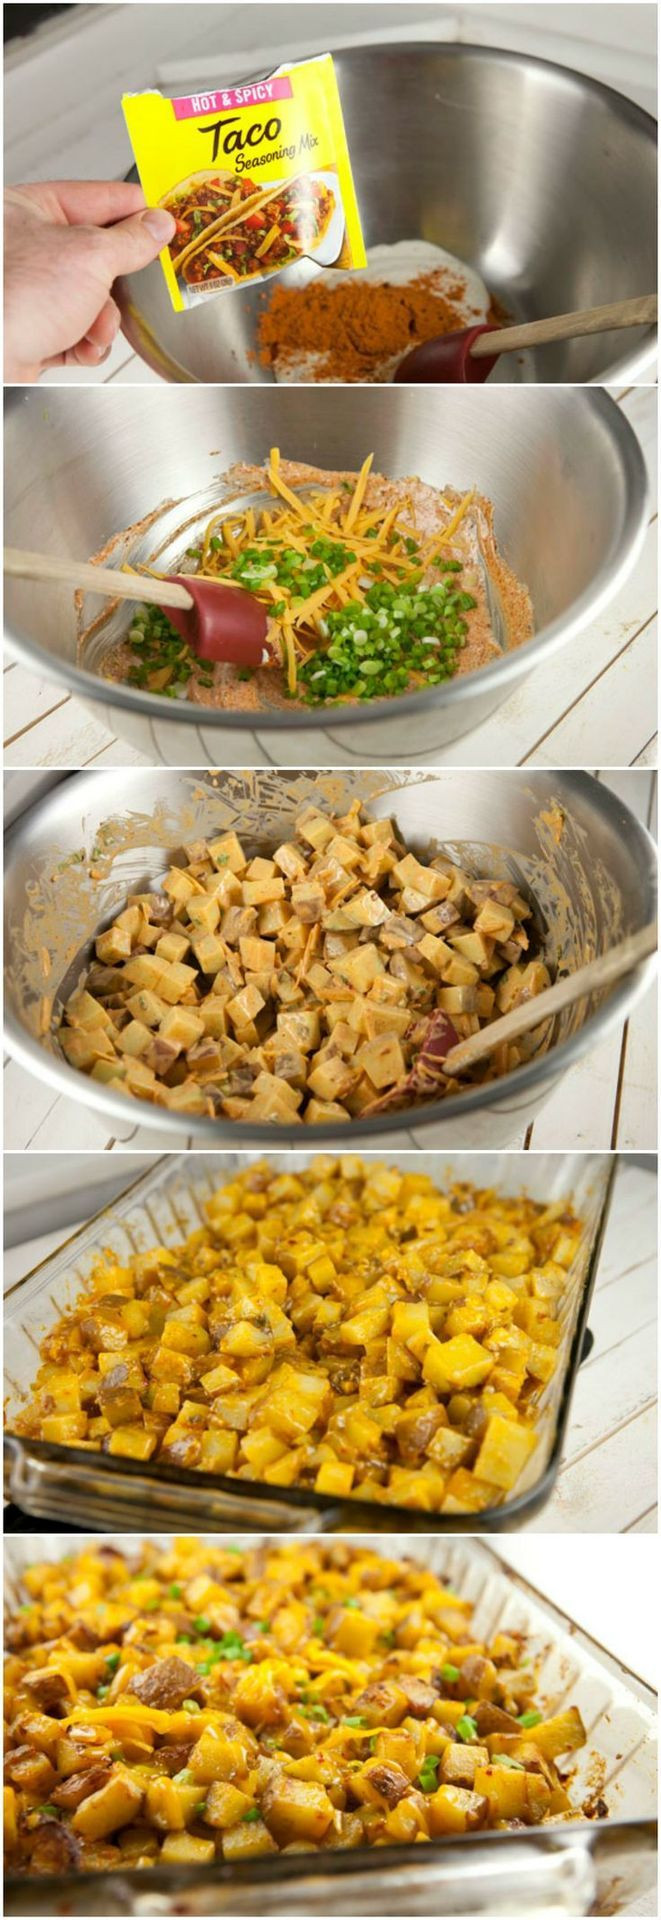 Quick Side Dishes
 Tex Mex Ranch Potatoes This looks like a quick and easy